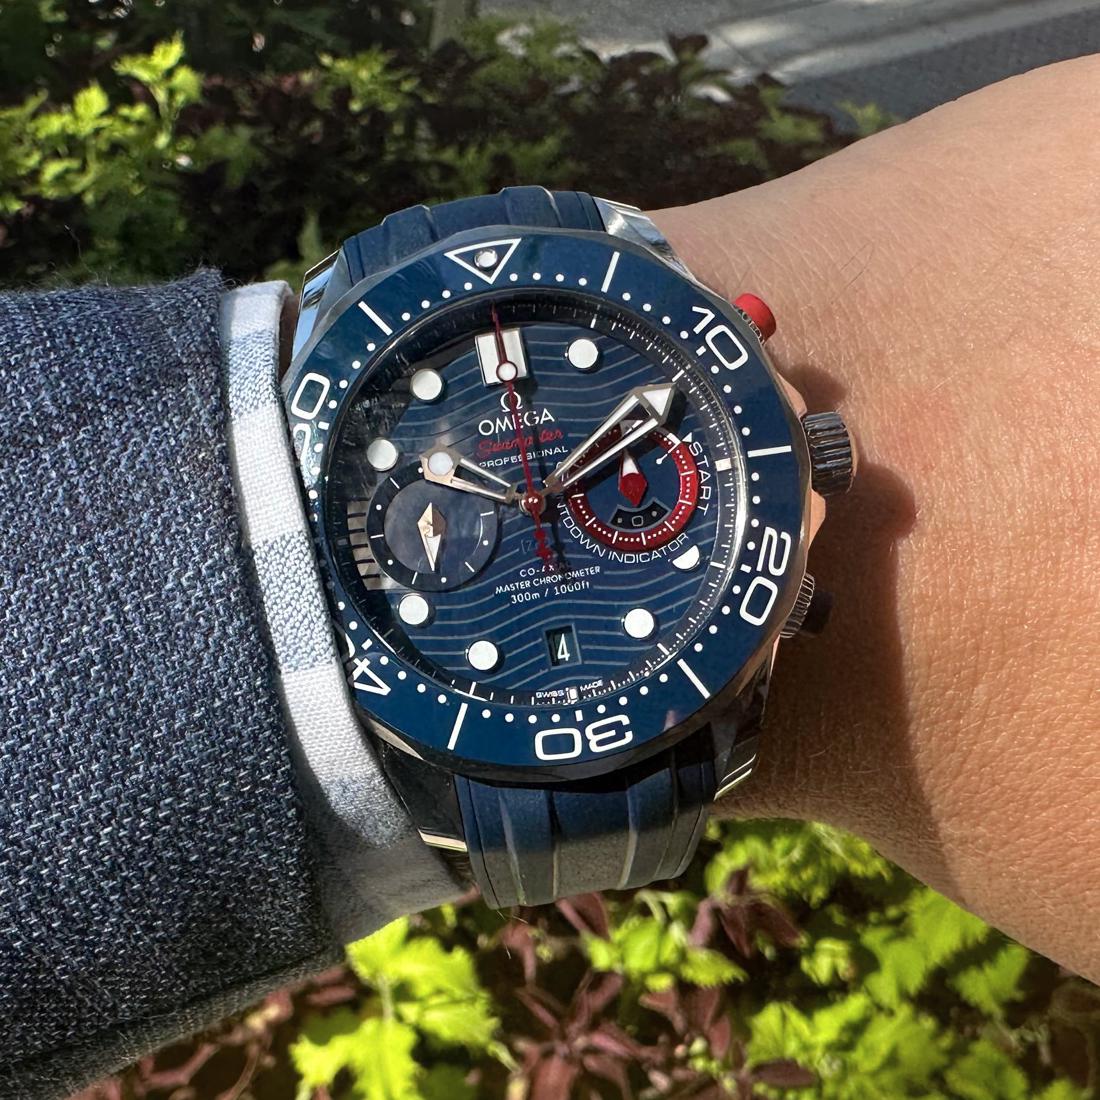 Omega Seamaster Diver 300M Chronograph AMERICA'S CUP In Excellent Condition For Sale In Palm Beach, FL